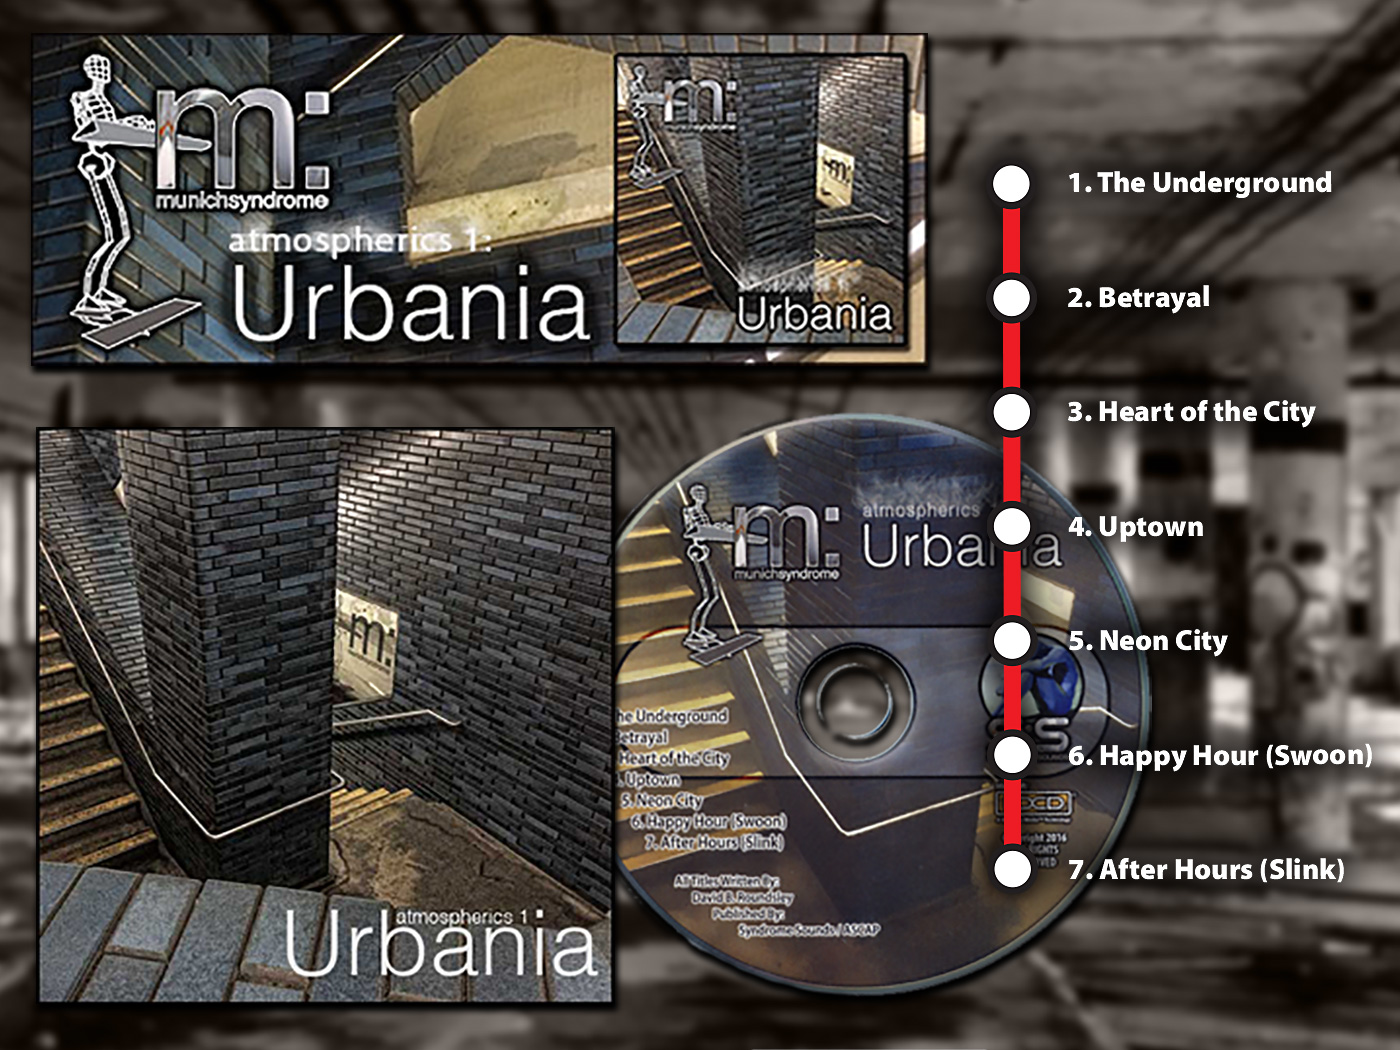 Atmospherics 1: Urbnania -A journey into the heart of the city